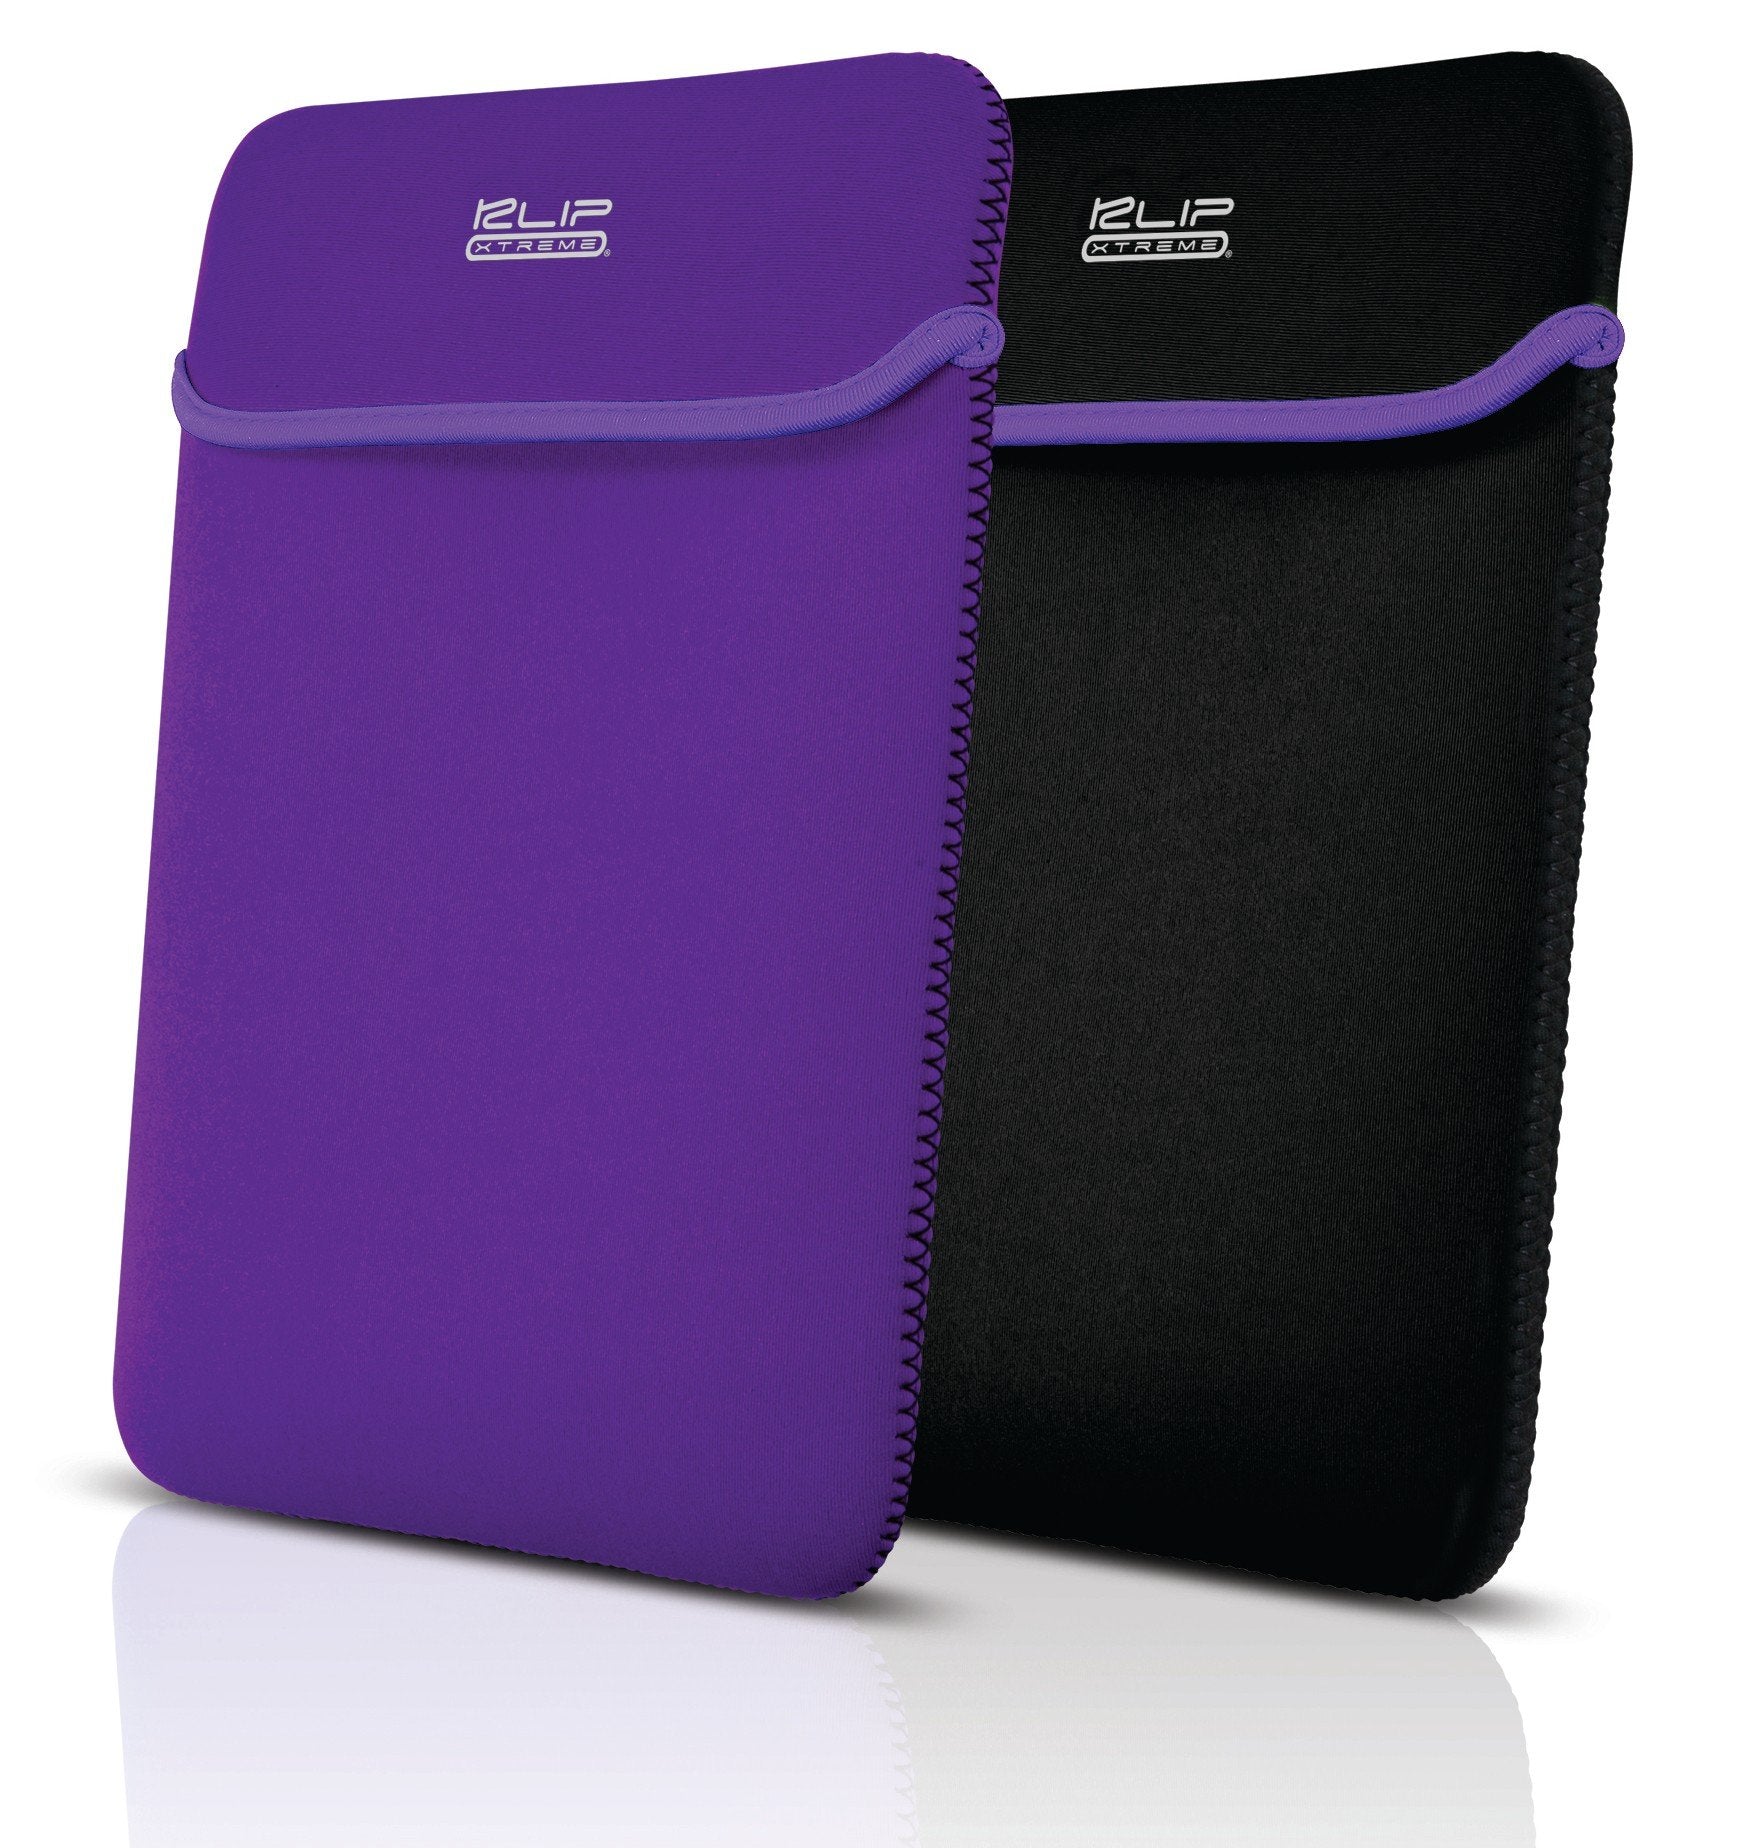 Klip Xtreme Kolours Reversible iPad/tablet sleeve for Tablets up to 10